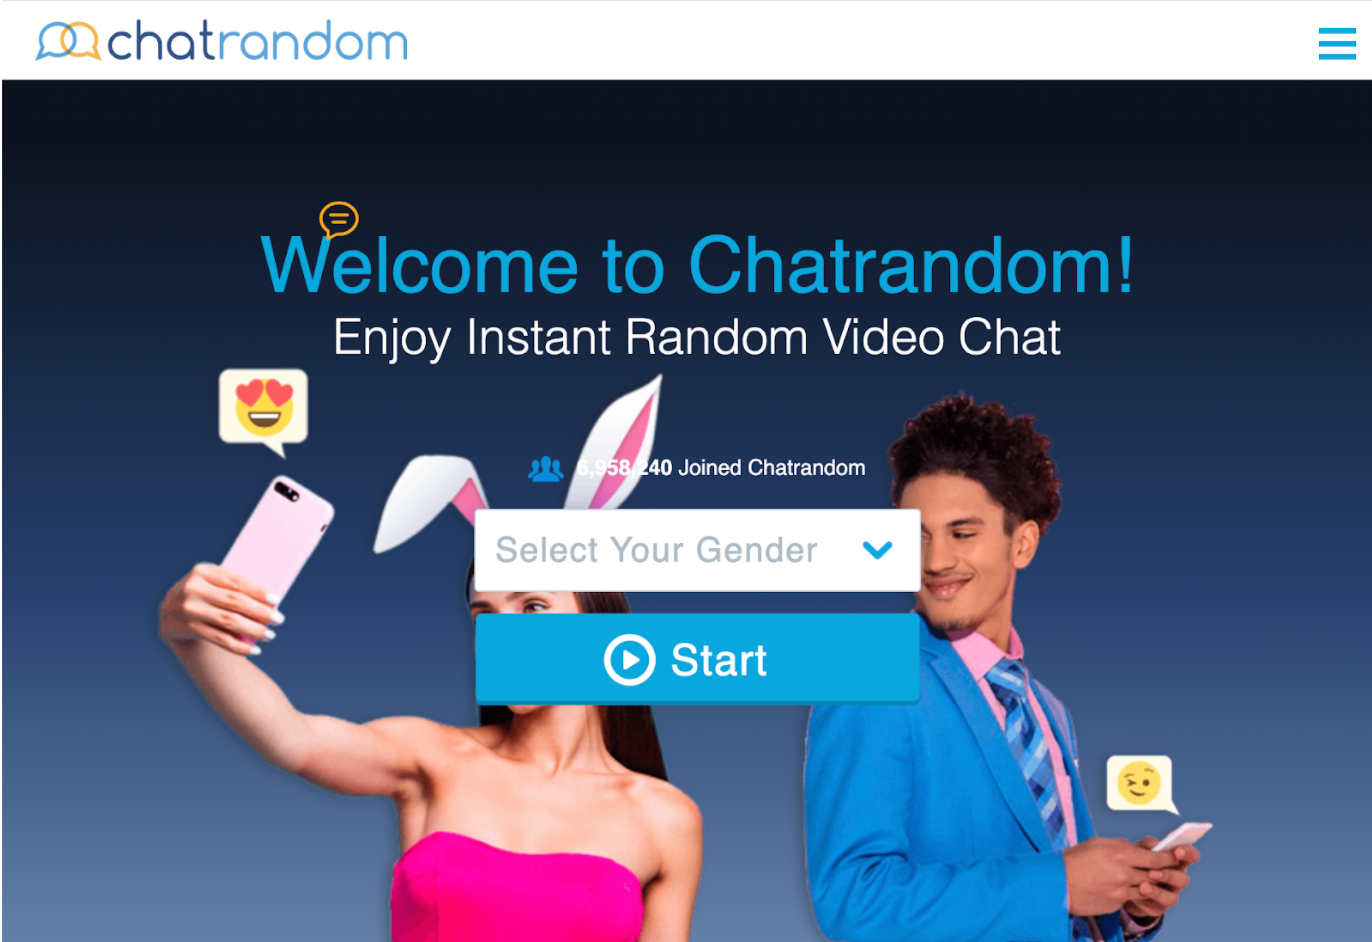 random video chat unmoderated